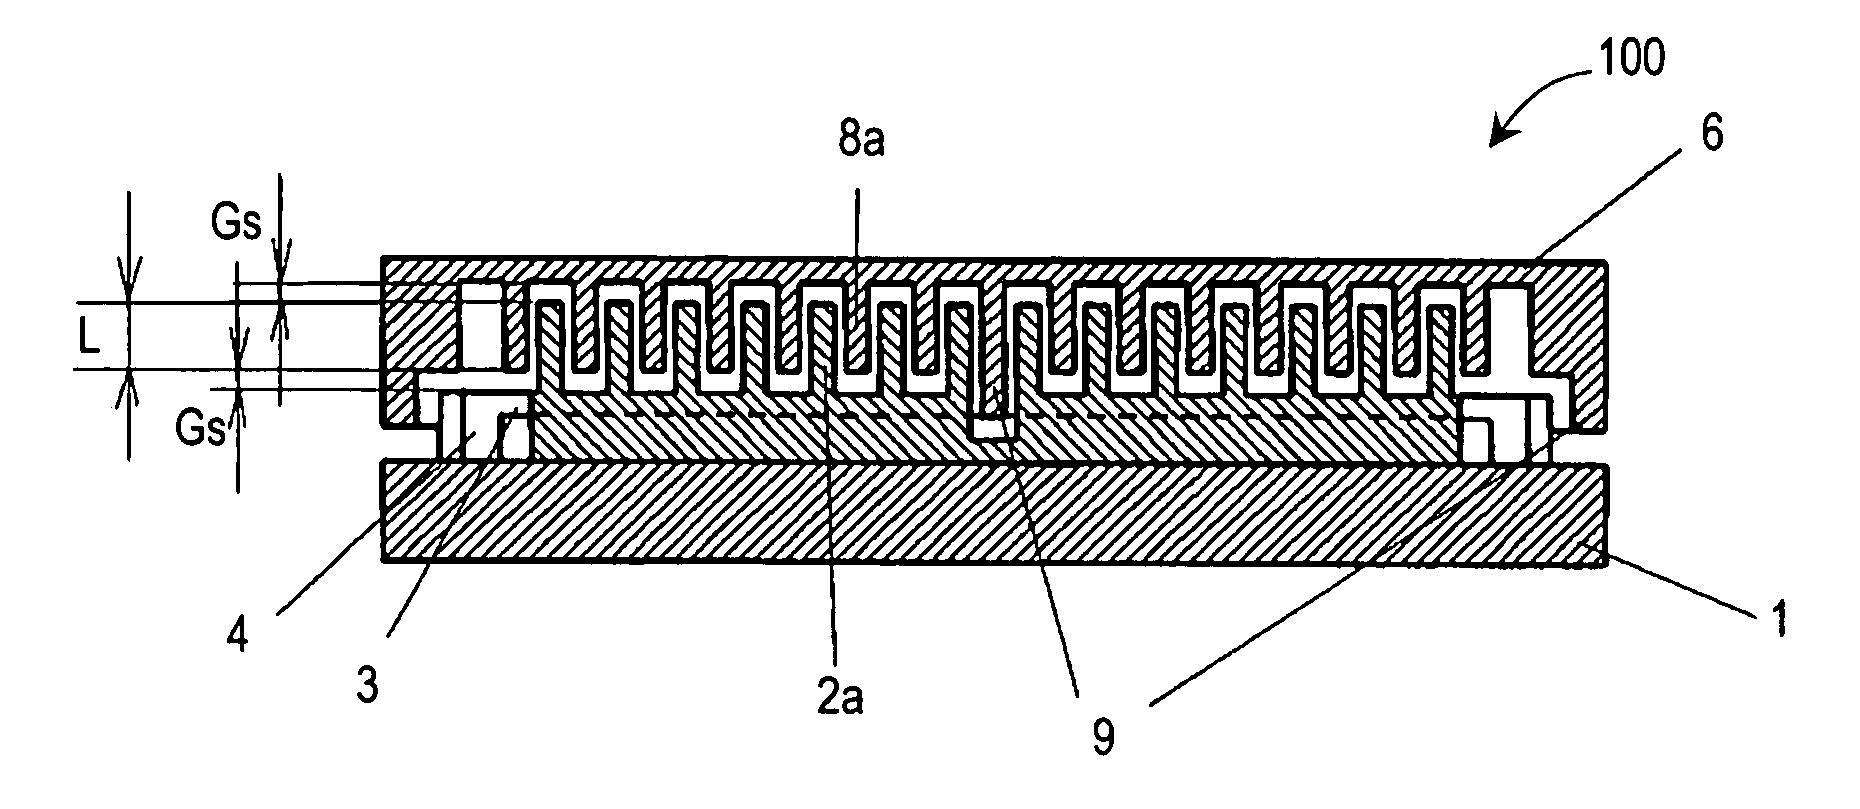 Microactuator having increased rigidity with reduced mass